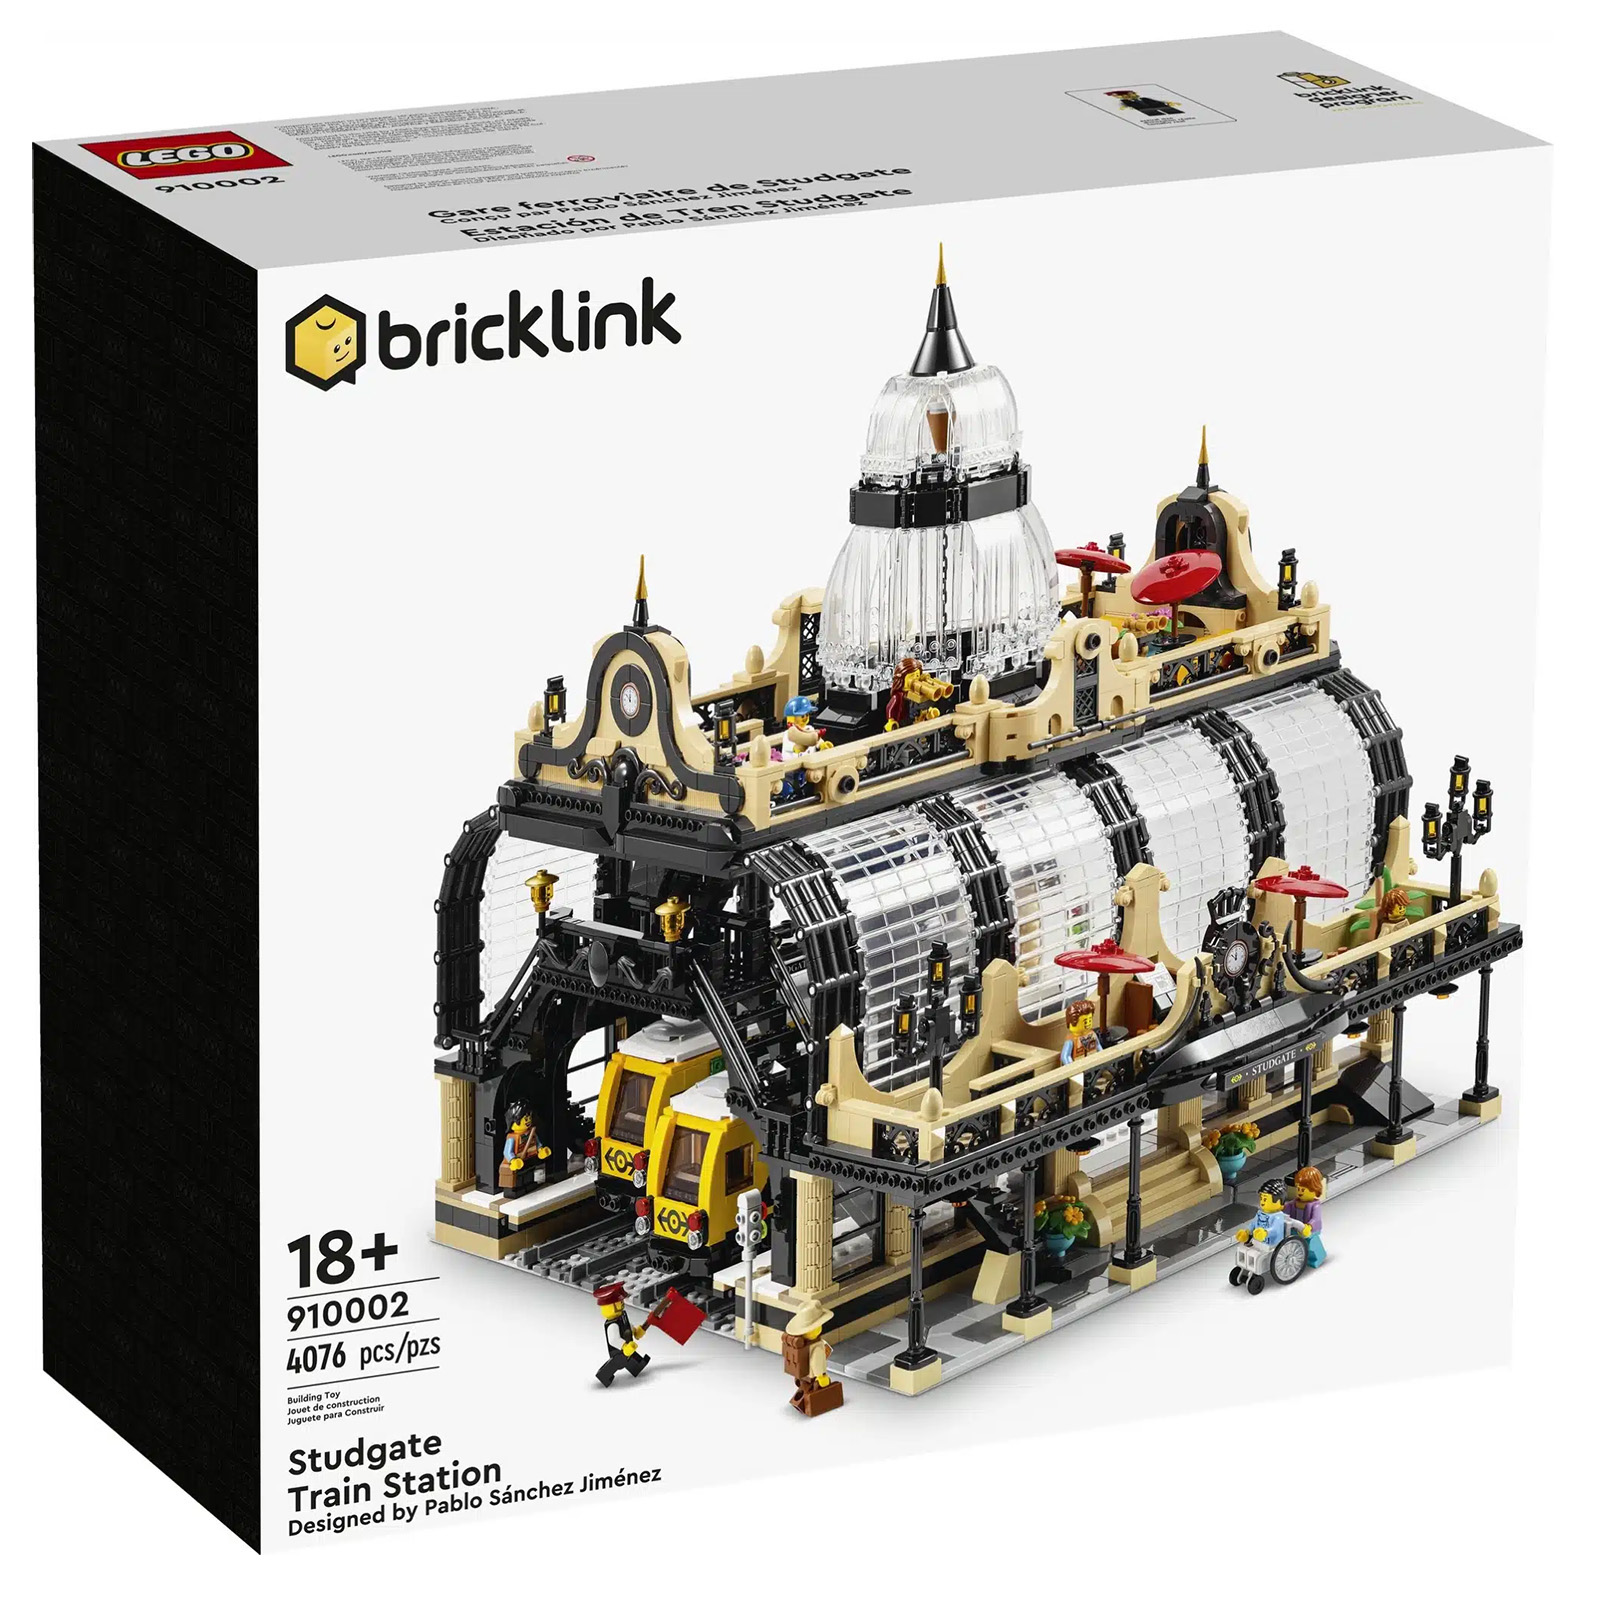 One LEGO set has sold out again in the BrickLink Program